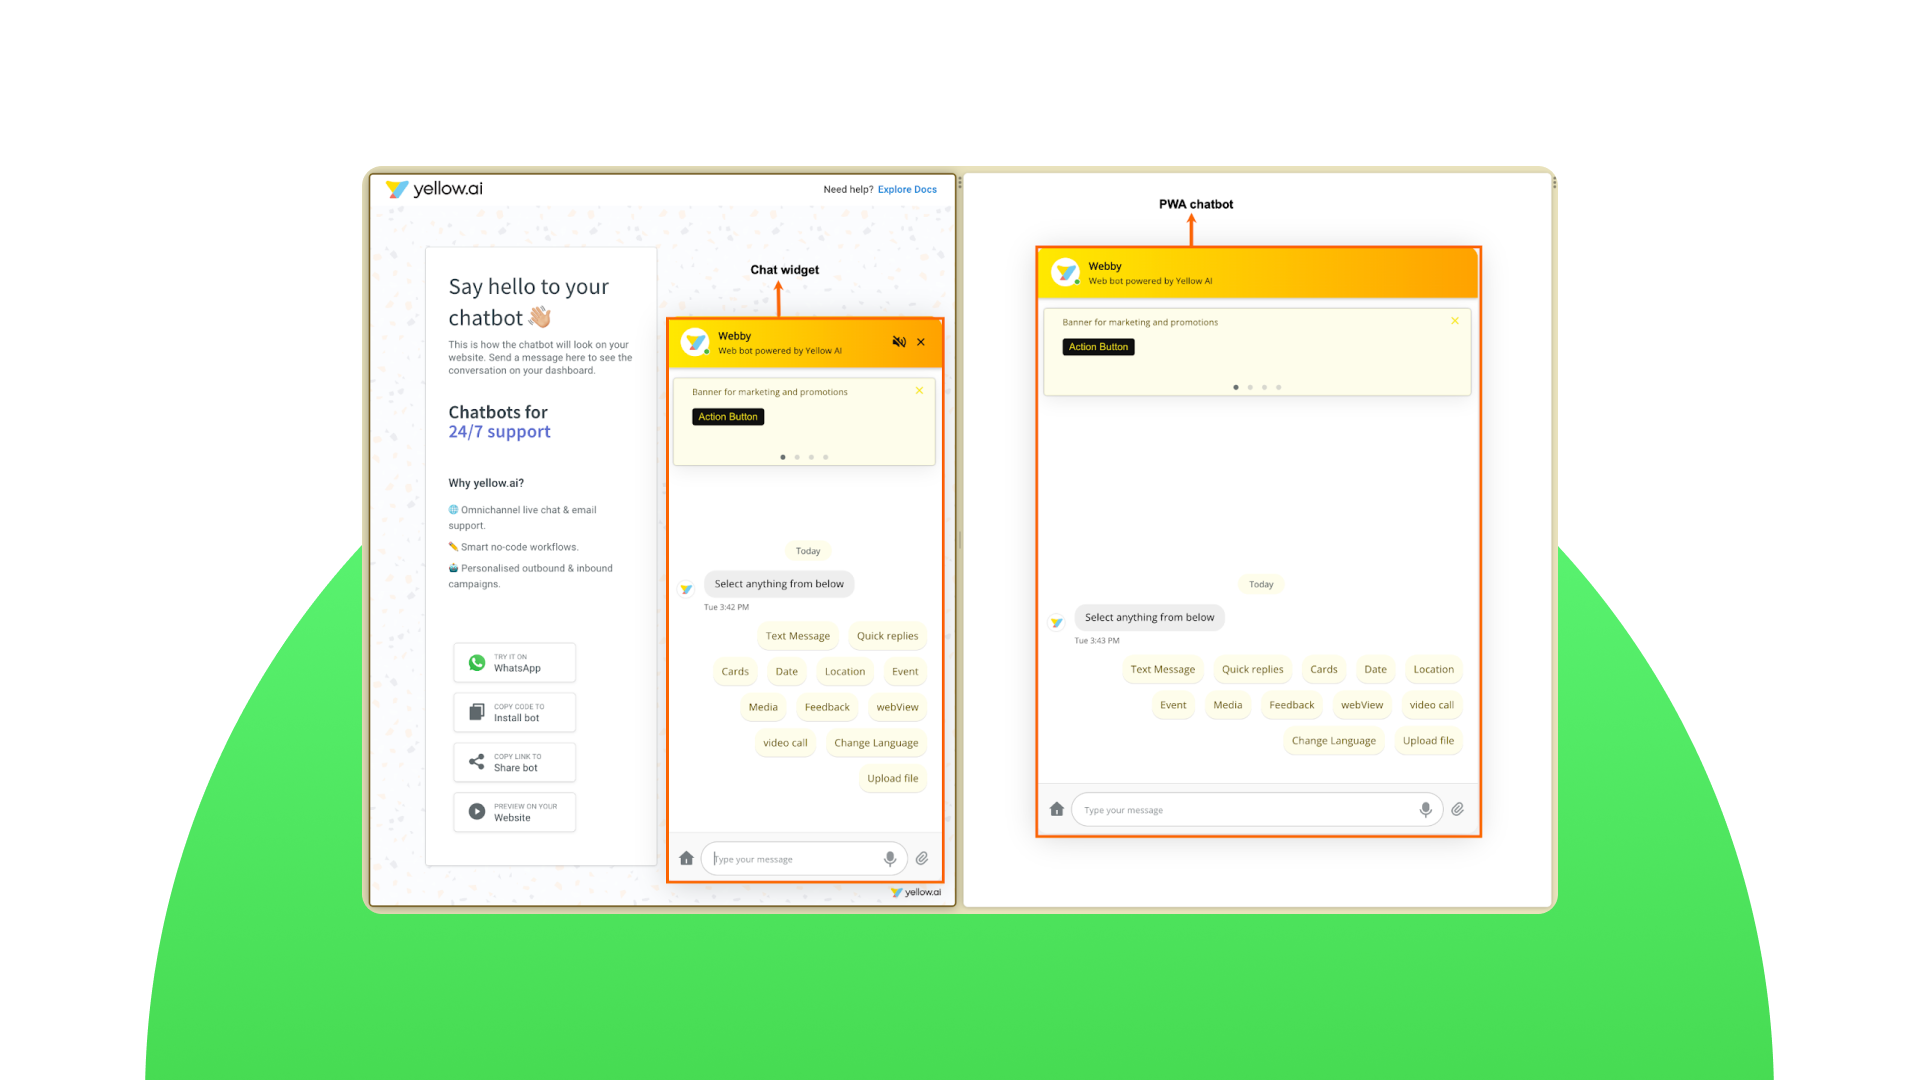 Yellow.ai chatbots support dynamic menus and voice interactions